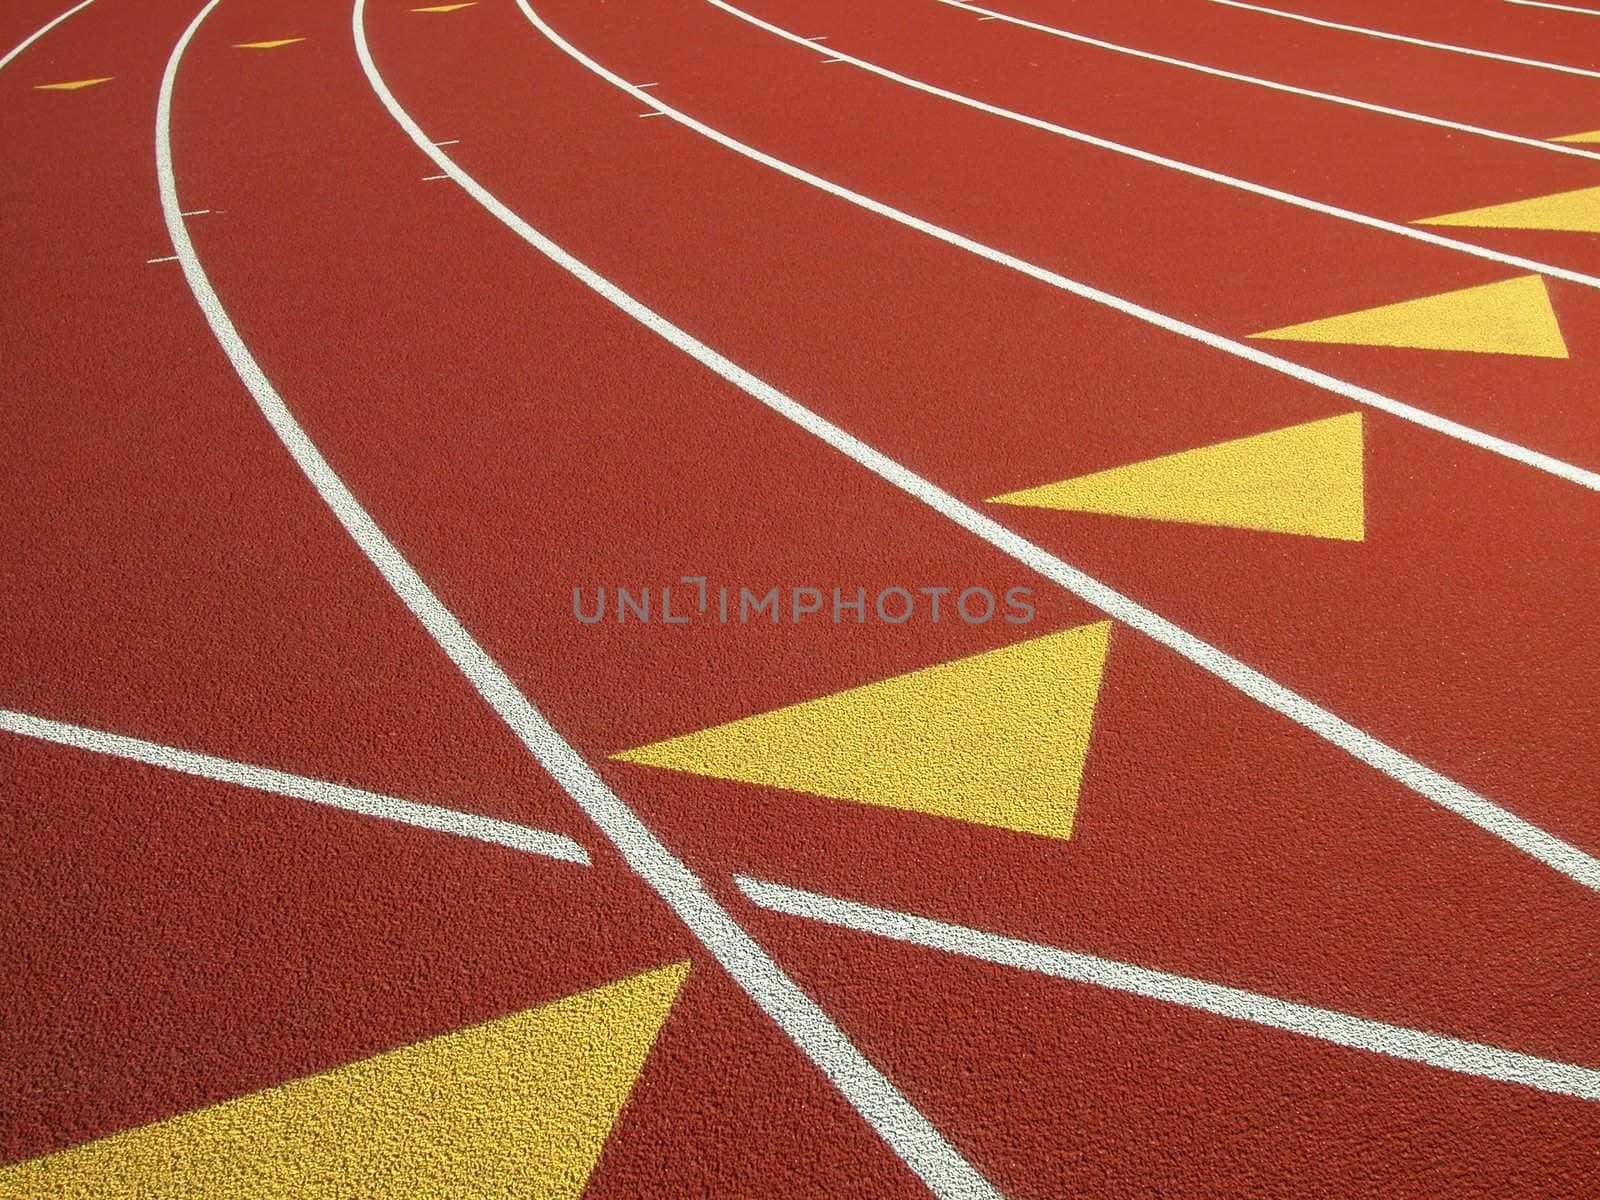 The Red Surface and White Lane Lines of a running track